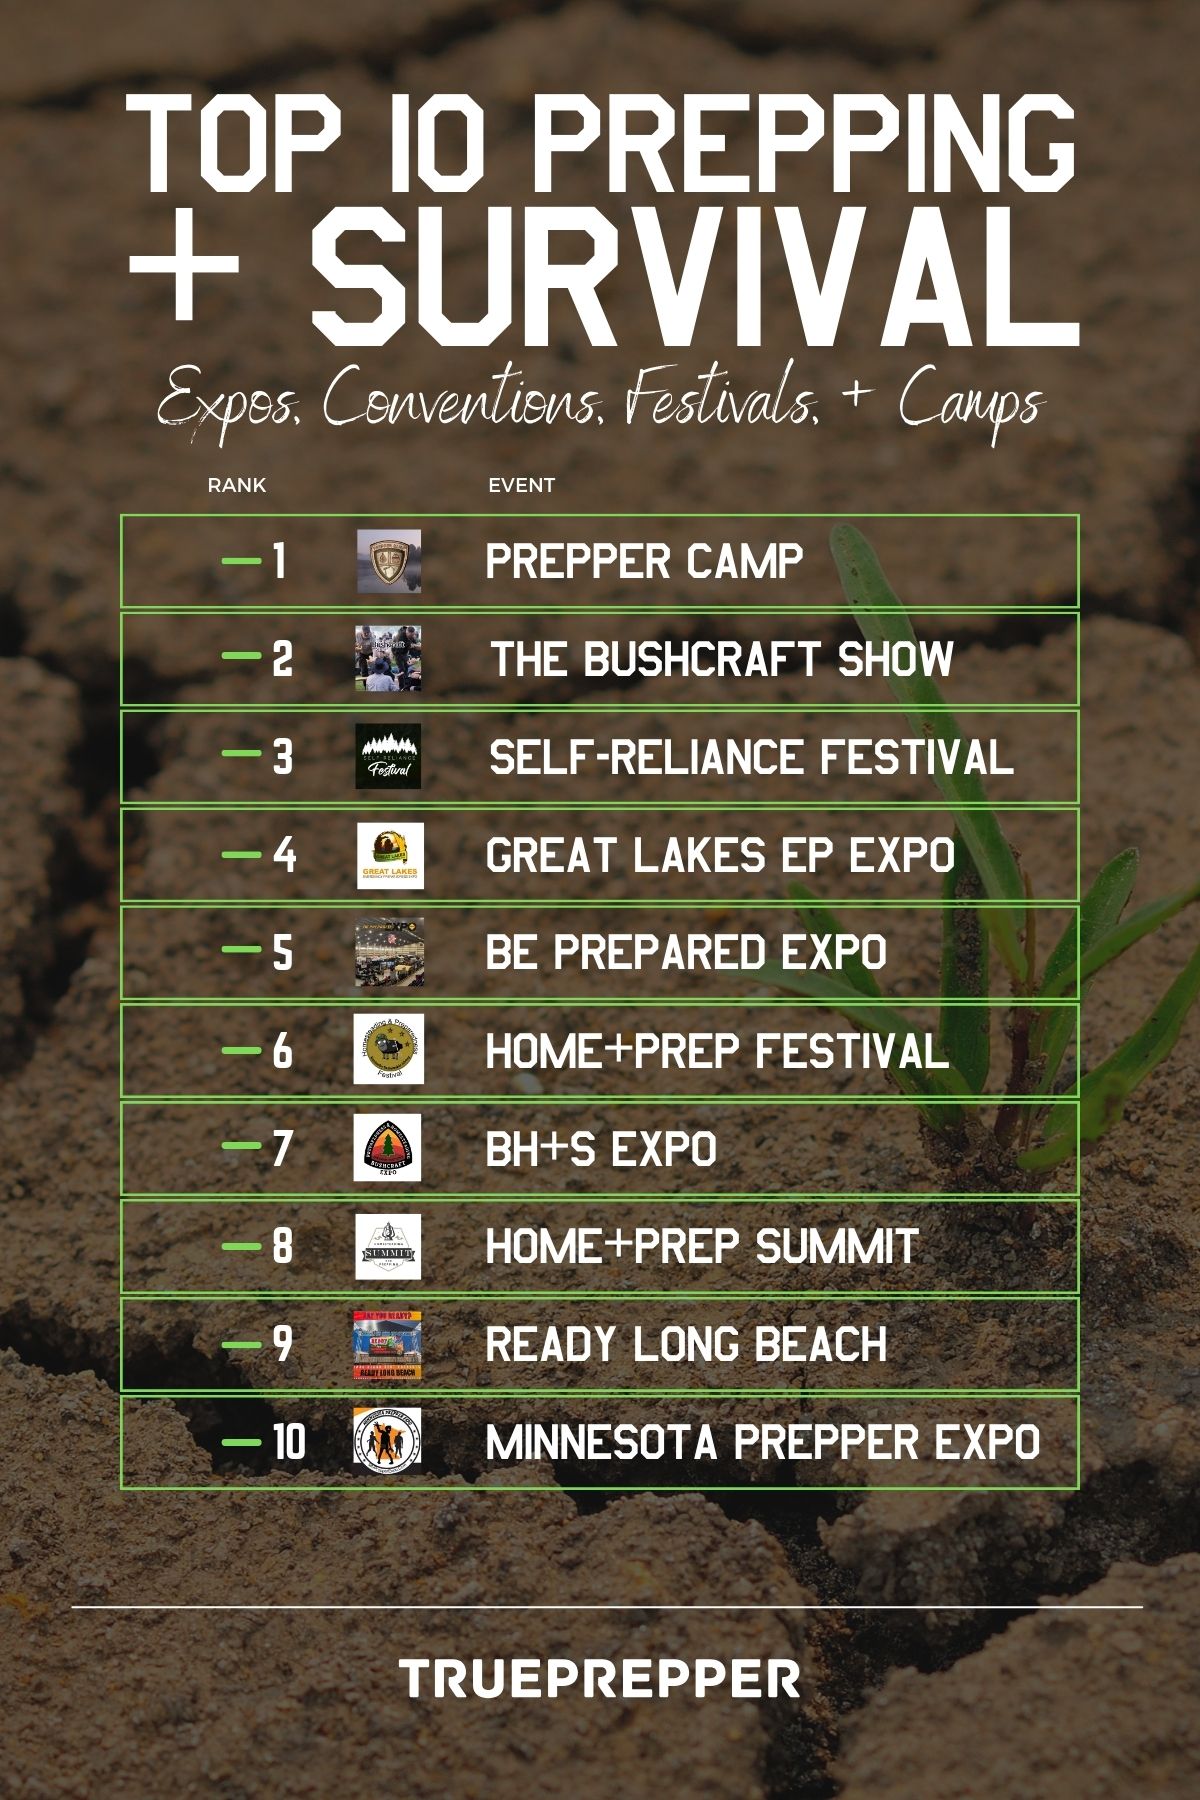 Top 10 Prepping & Survival Expos, Conventions, Festivals, & Camps